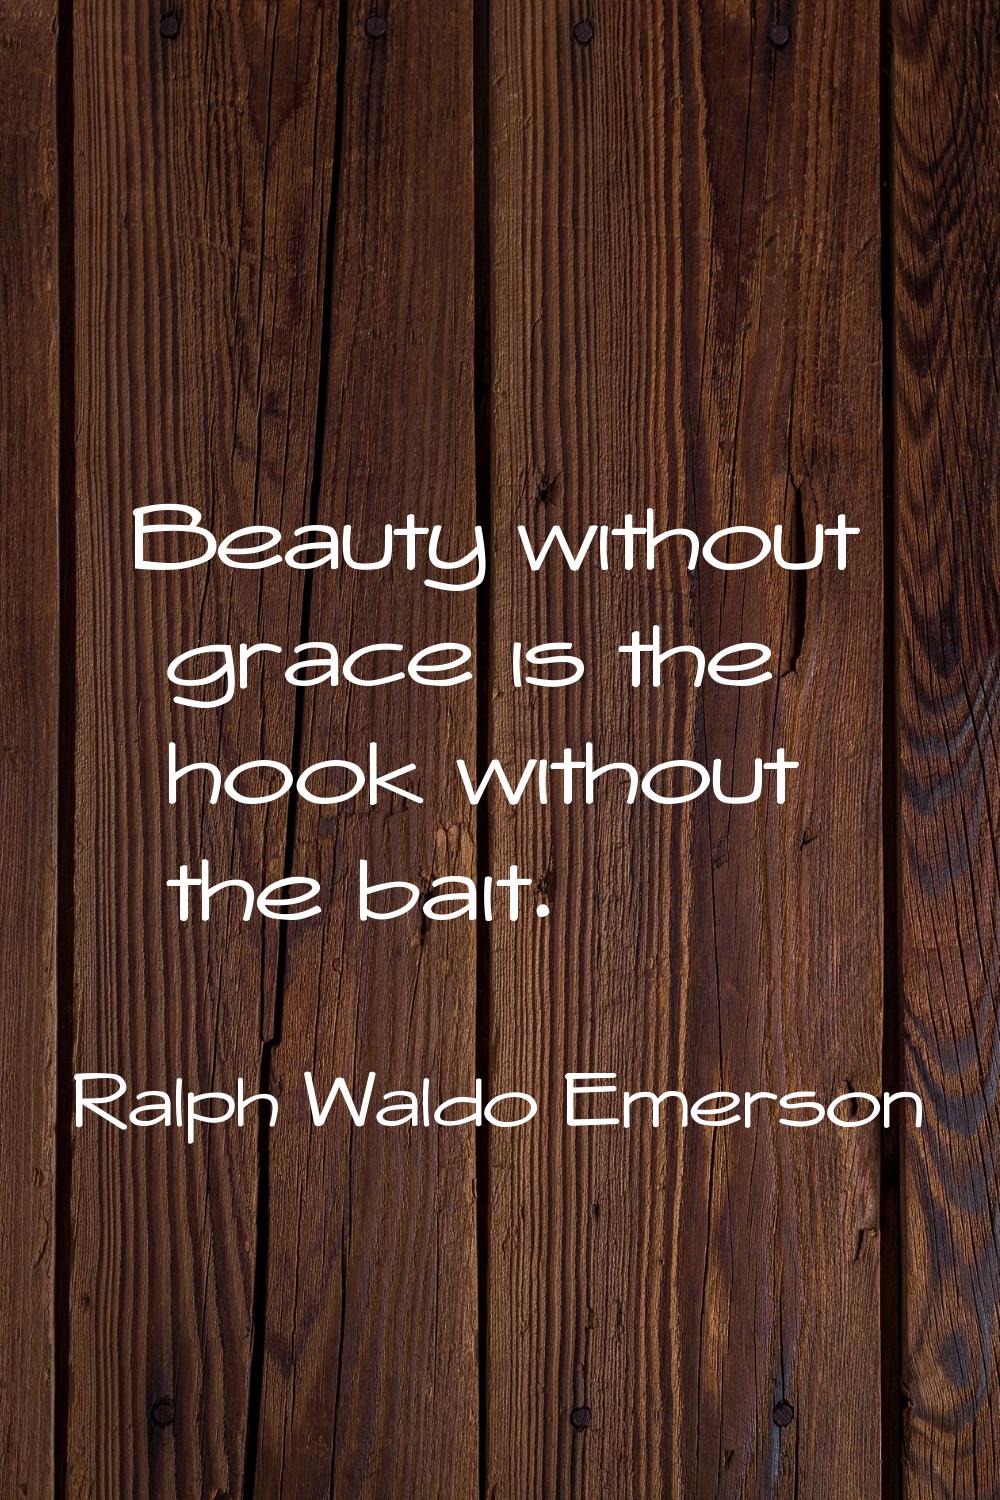 Beauty without grace is the hook without the bait.